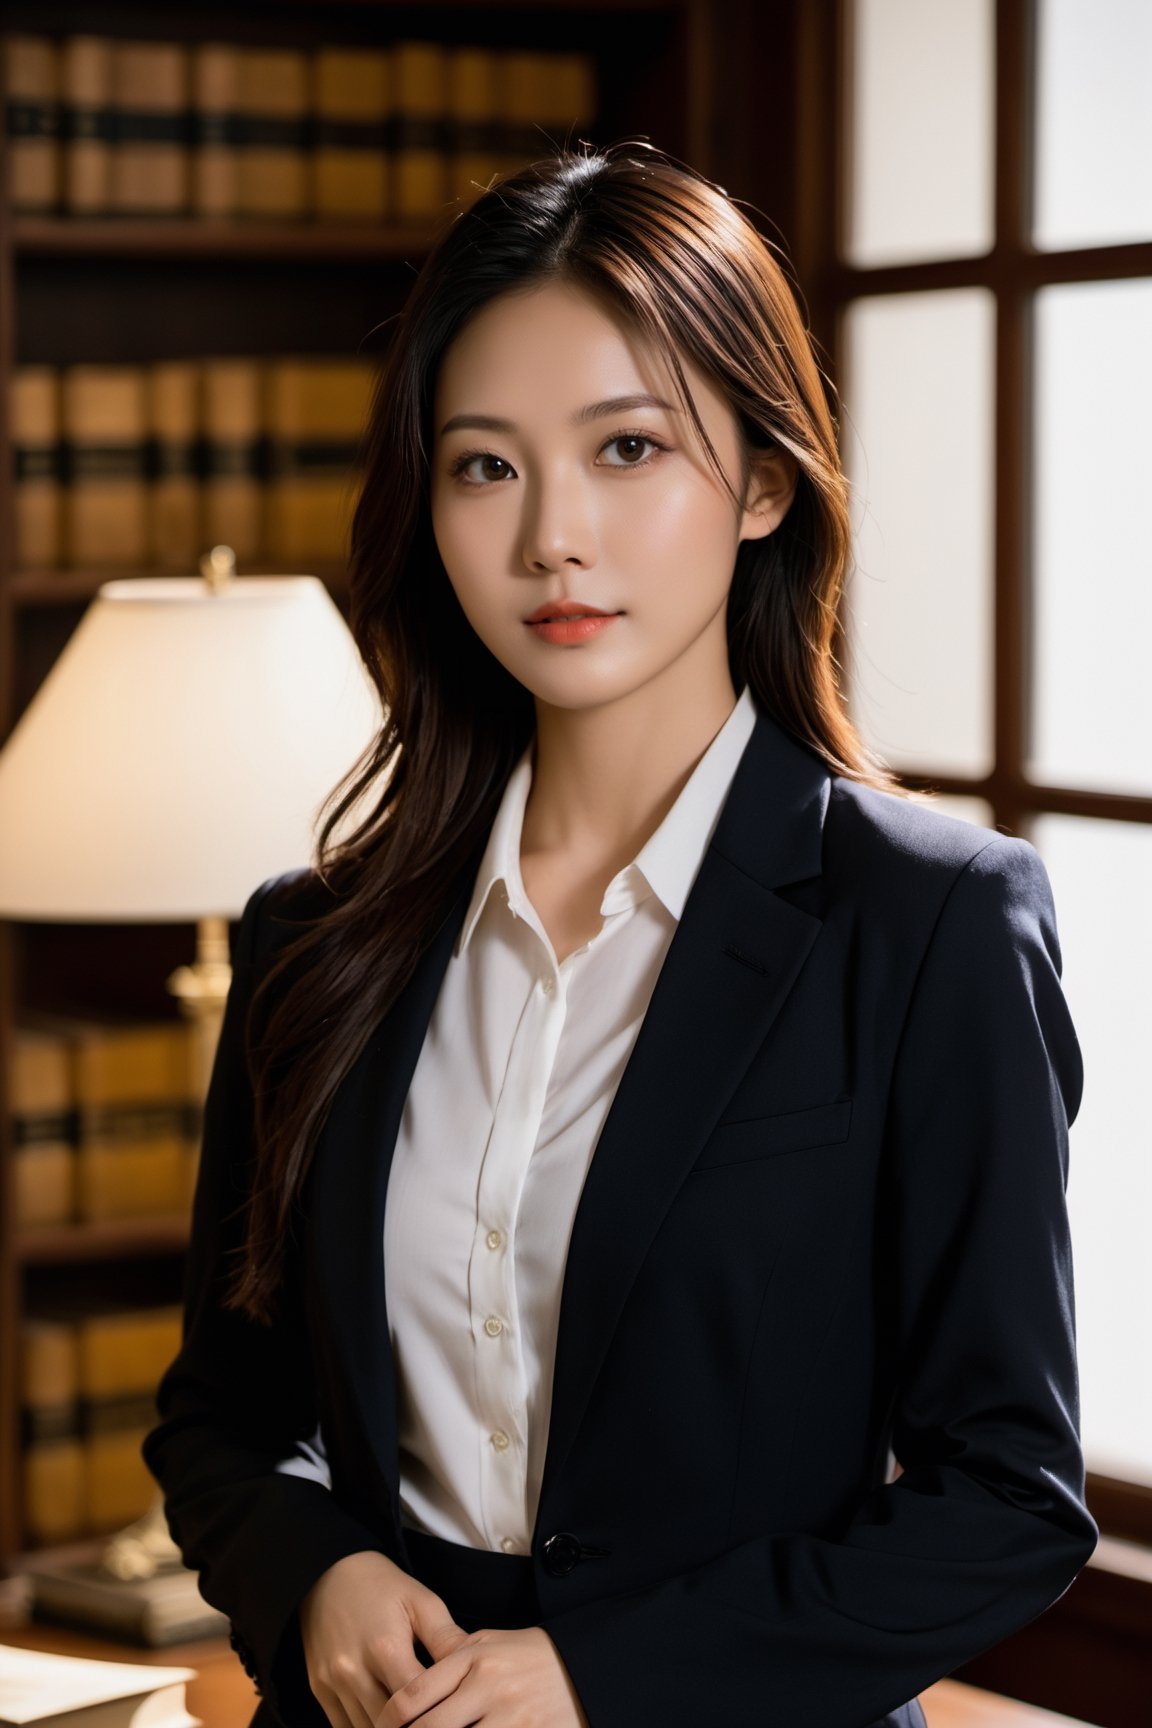 xxmix_girl, 1girl, Realistic, (full body:1.3), Candid Photo of an Asian female lawyer, scene set in a well-furnished office, books lining the shelves behind her, warm color temperature, calm demeanor emphasized, soft smile, hint of contentment evident, captured using a 50mm lens, balance between subject and surroundings, natural lighting from a nearby window, gentle shadows cast, serene atmosphere